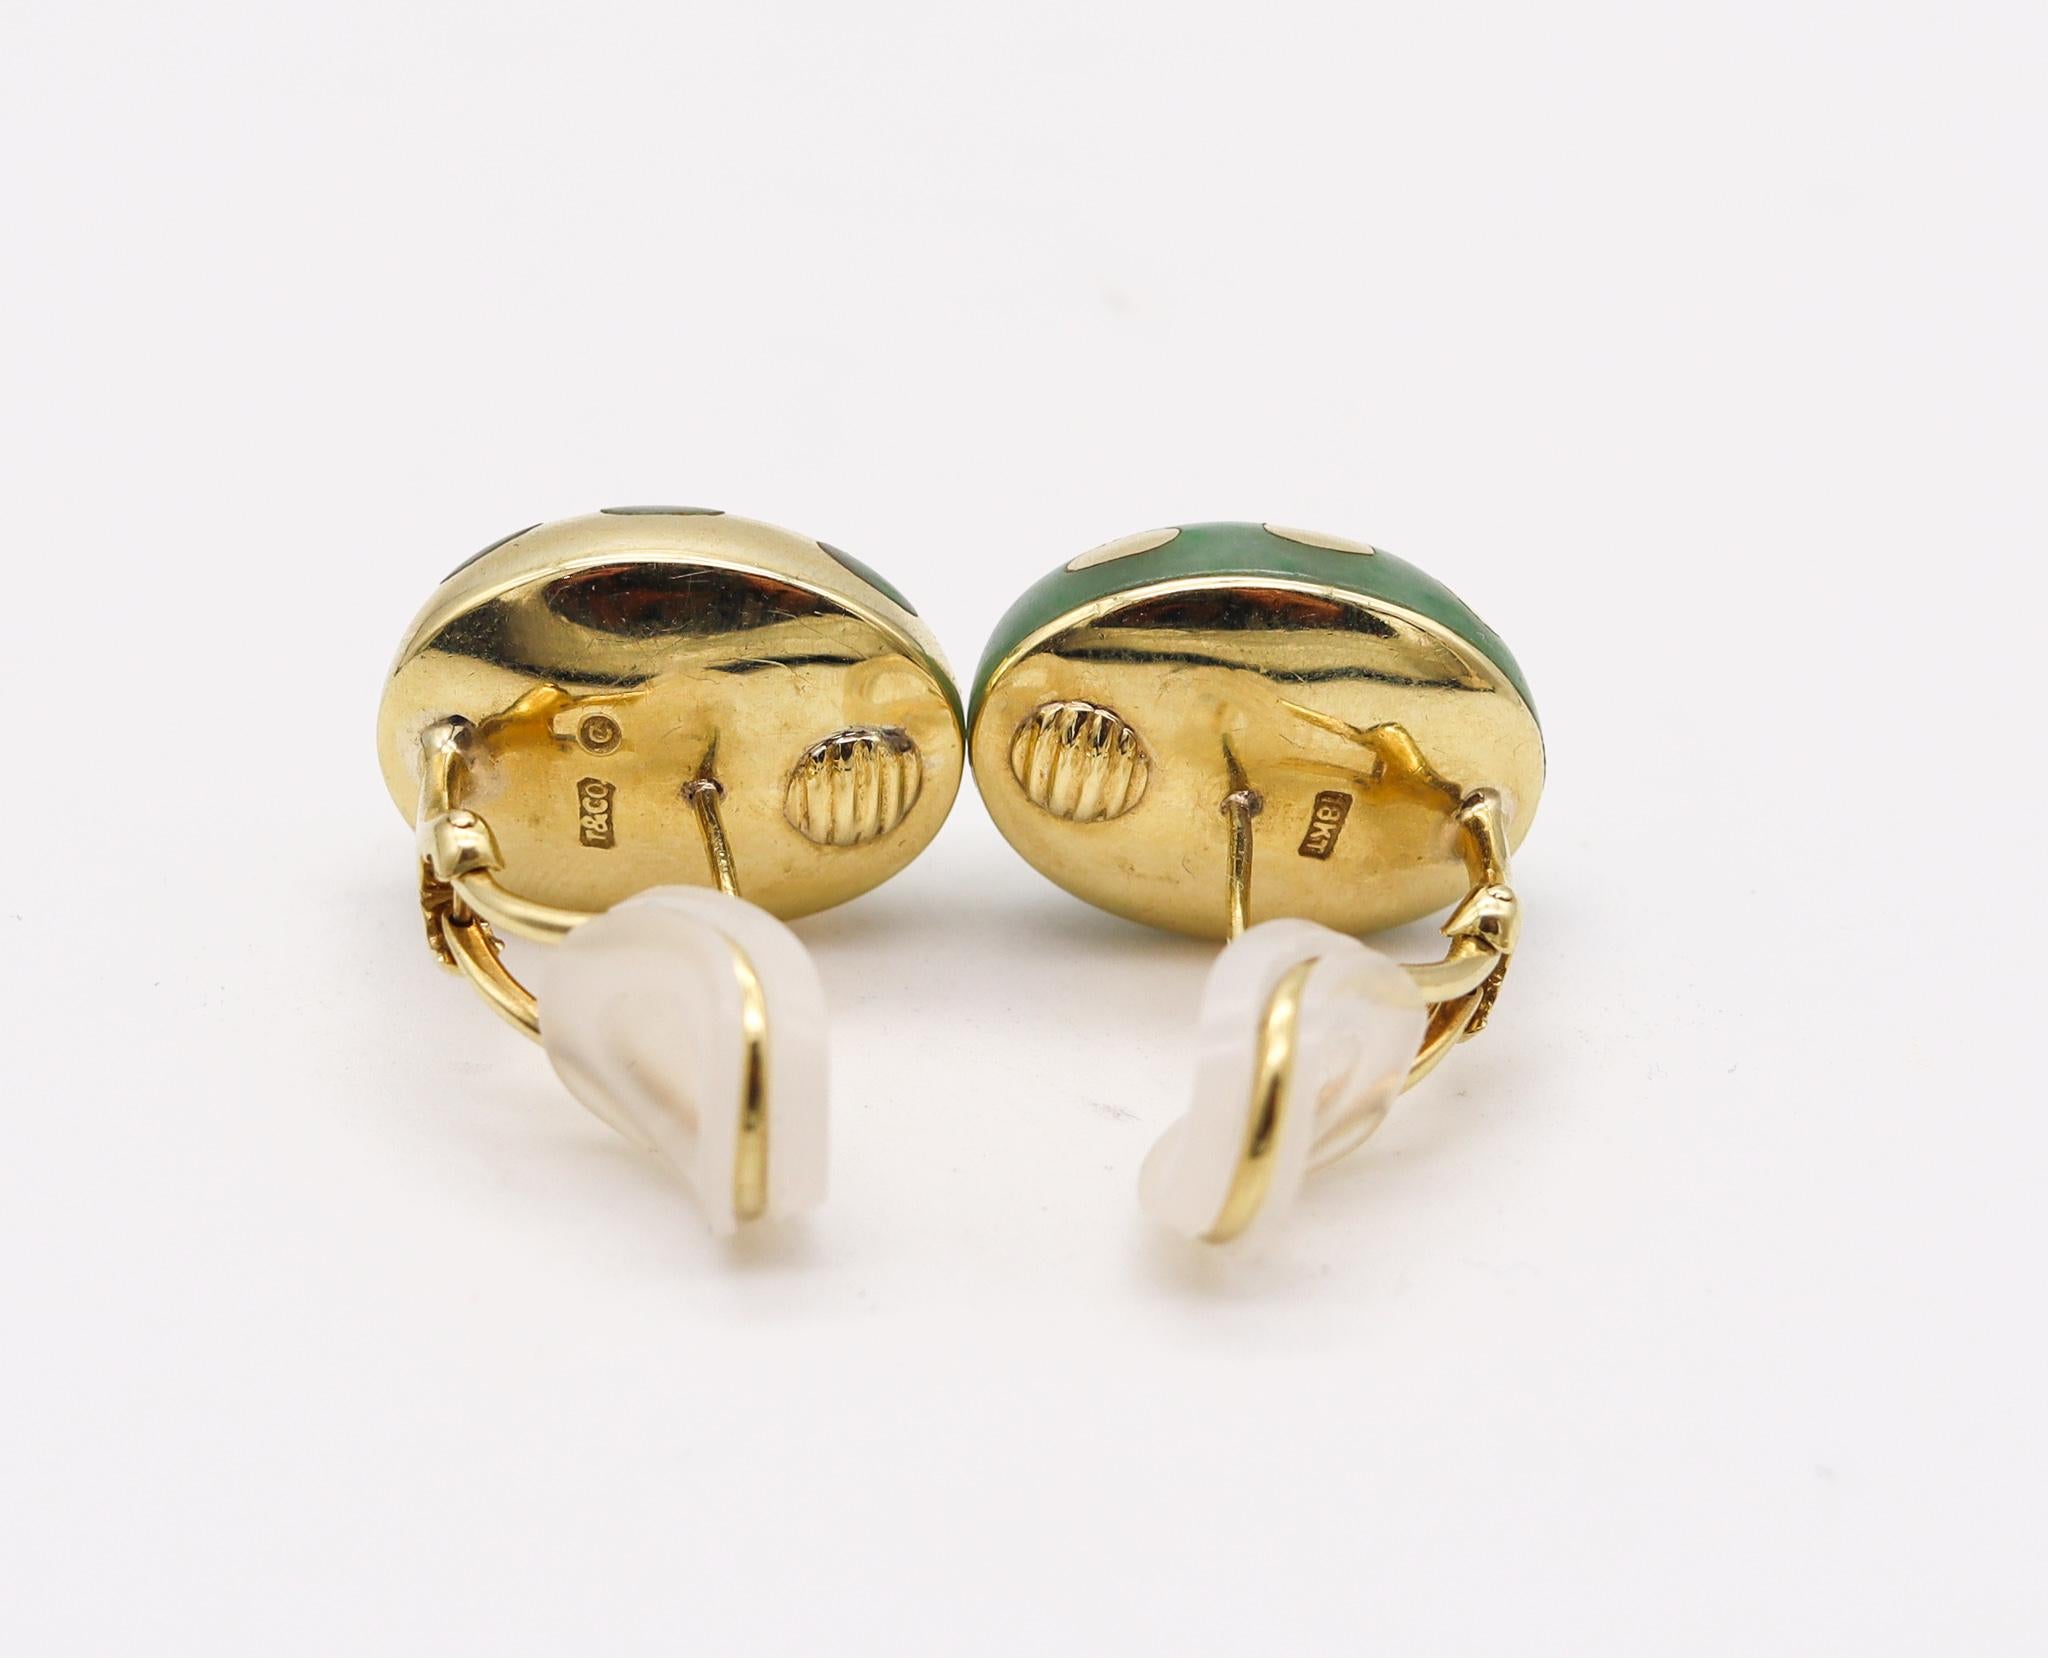 Modernist Tiffany & Co 1977 Angela Cummings Dots Earrings 18Kt Yellow Gold with Green Jade For Sale